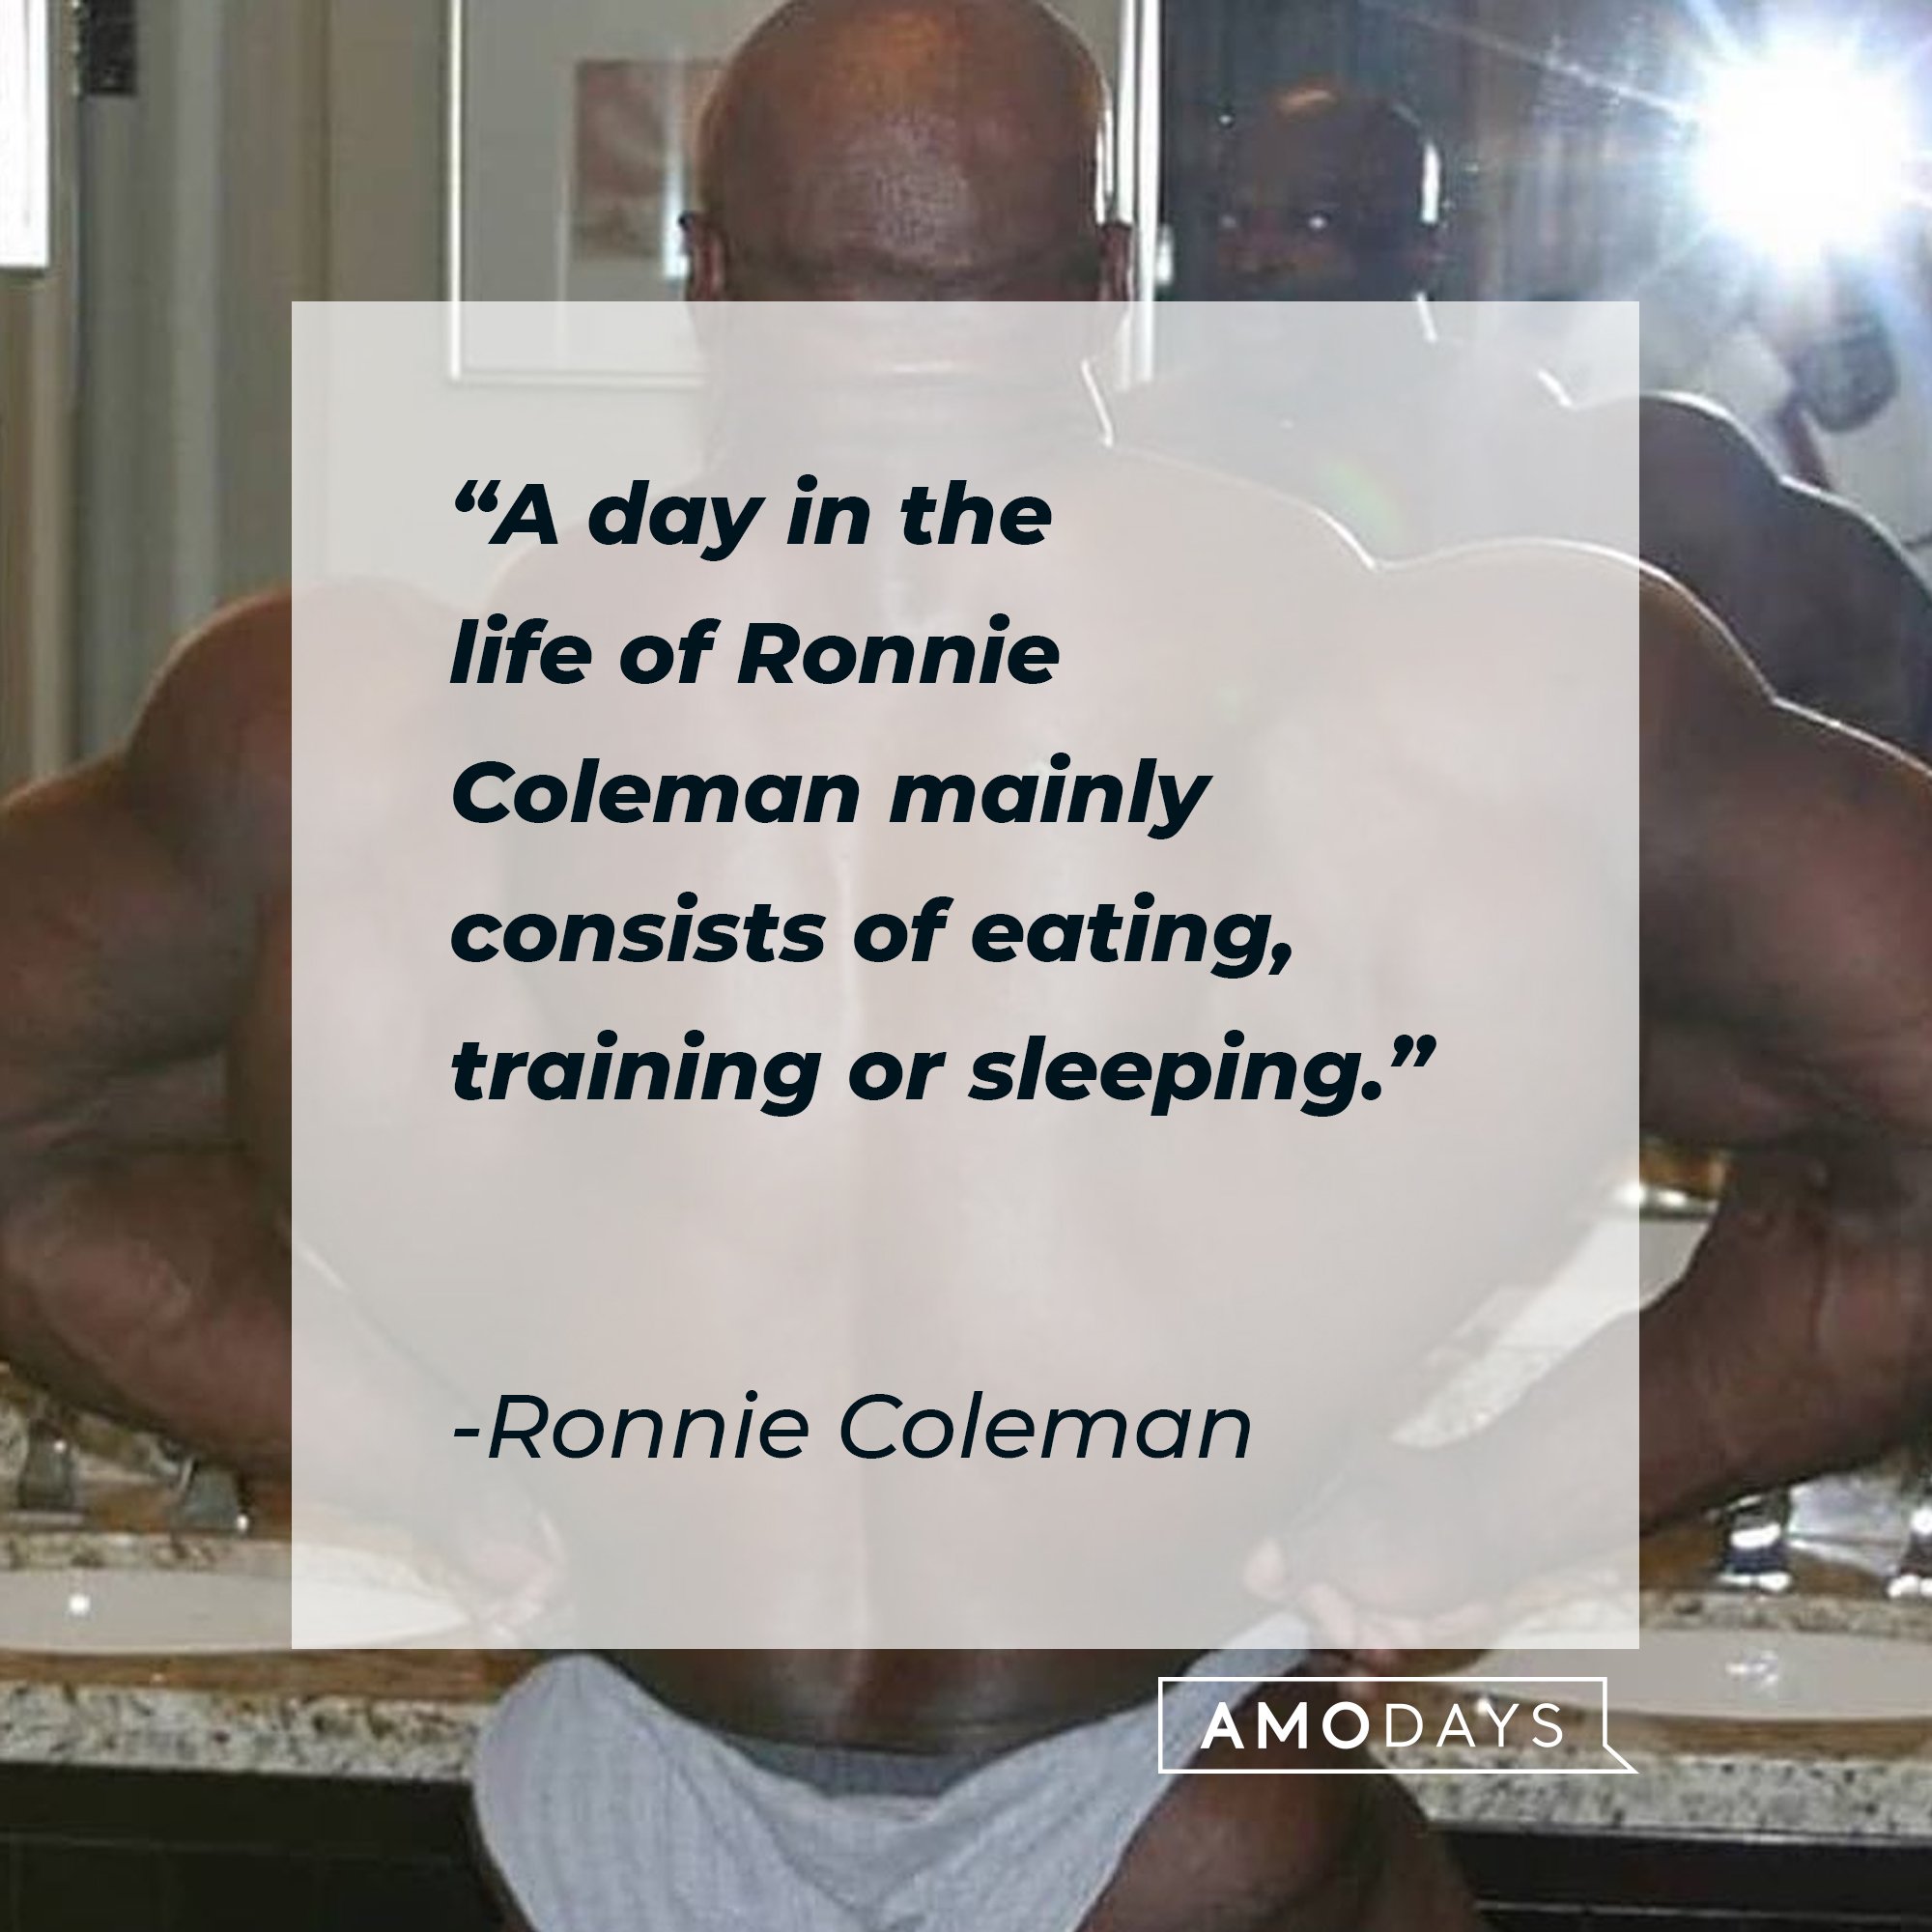  Ronnie Coleman’s quote: “A day in the life of Ronnie Coleman mainly consists of eating, training or sleeping.” | Image: AmoDays